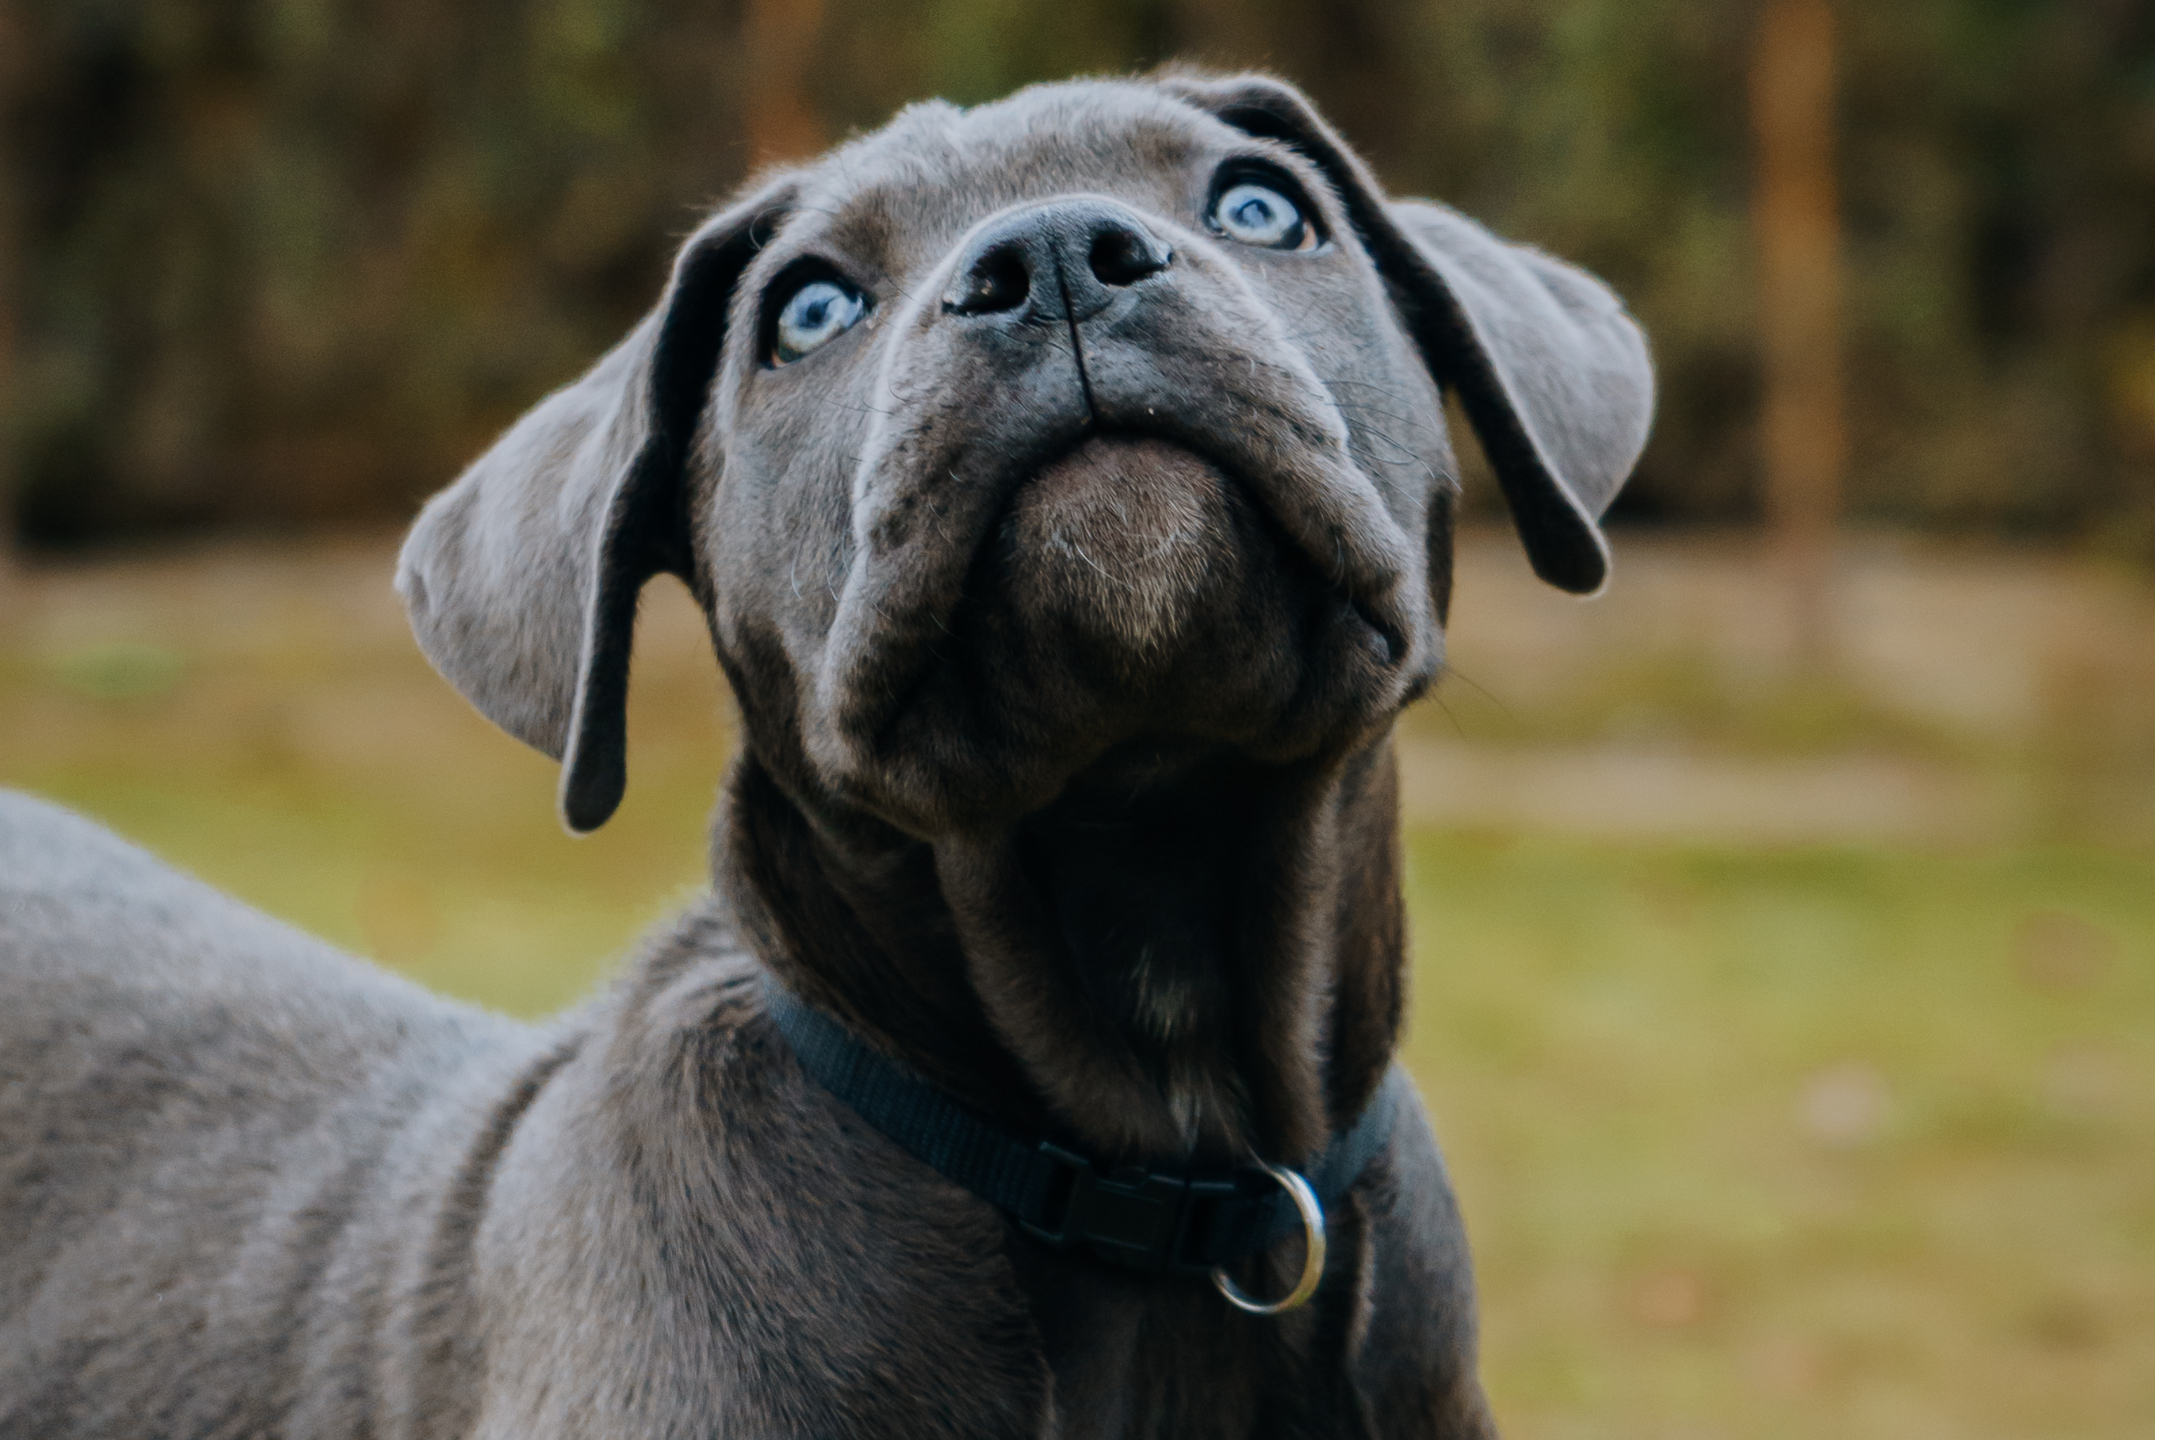 An adorable blue cane corso looking up while someone wonders Are Cane Corsos Good Family Dogs?